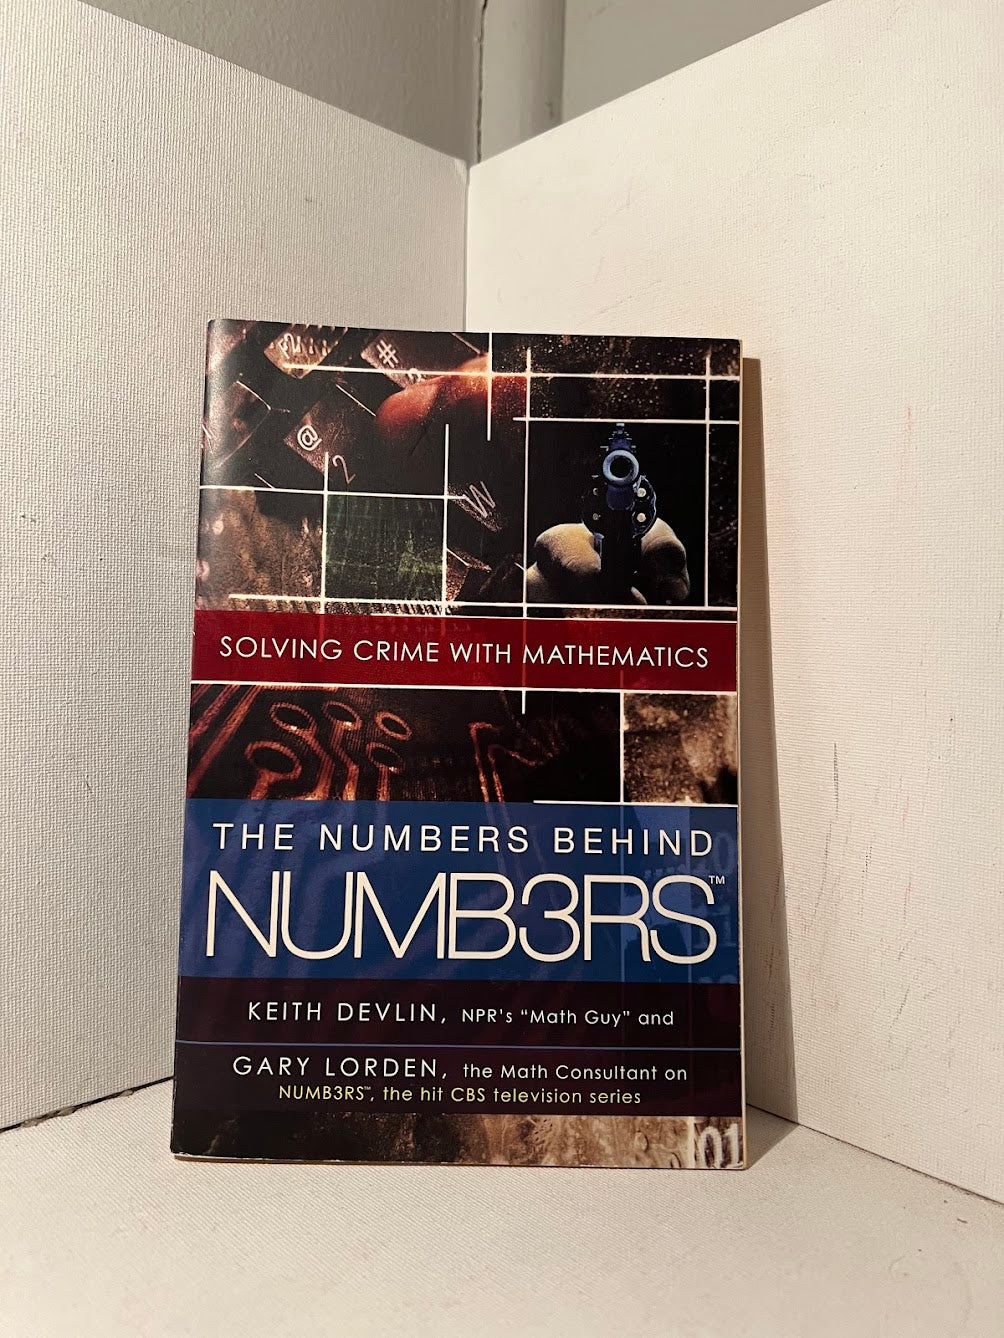 The Numbers Behind Numbers by Keith Devlin and Gary Lorden